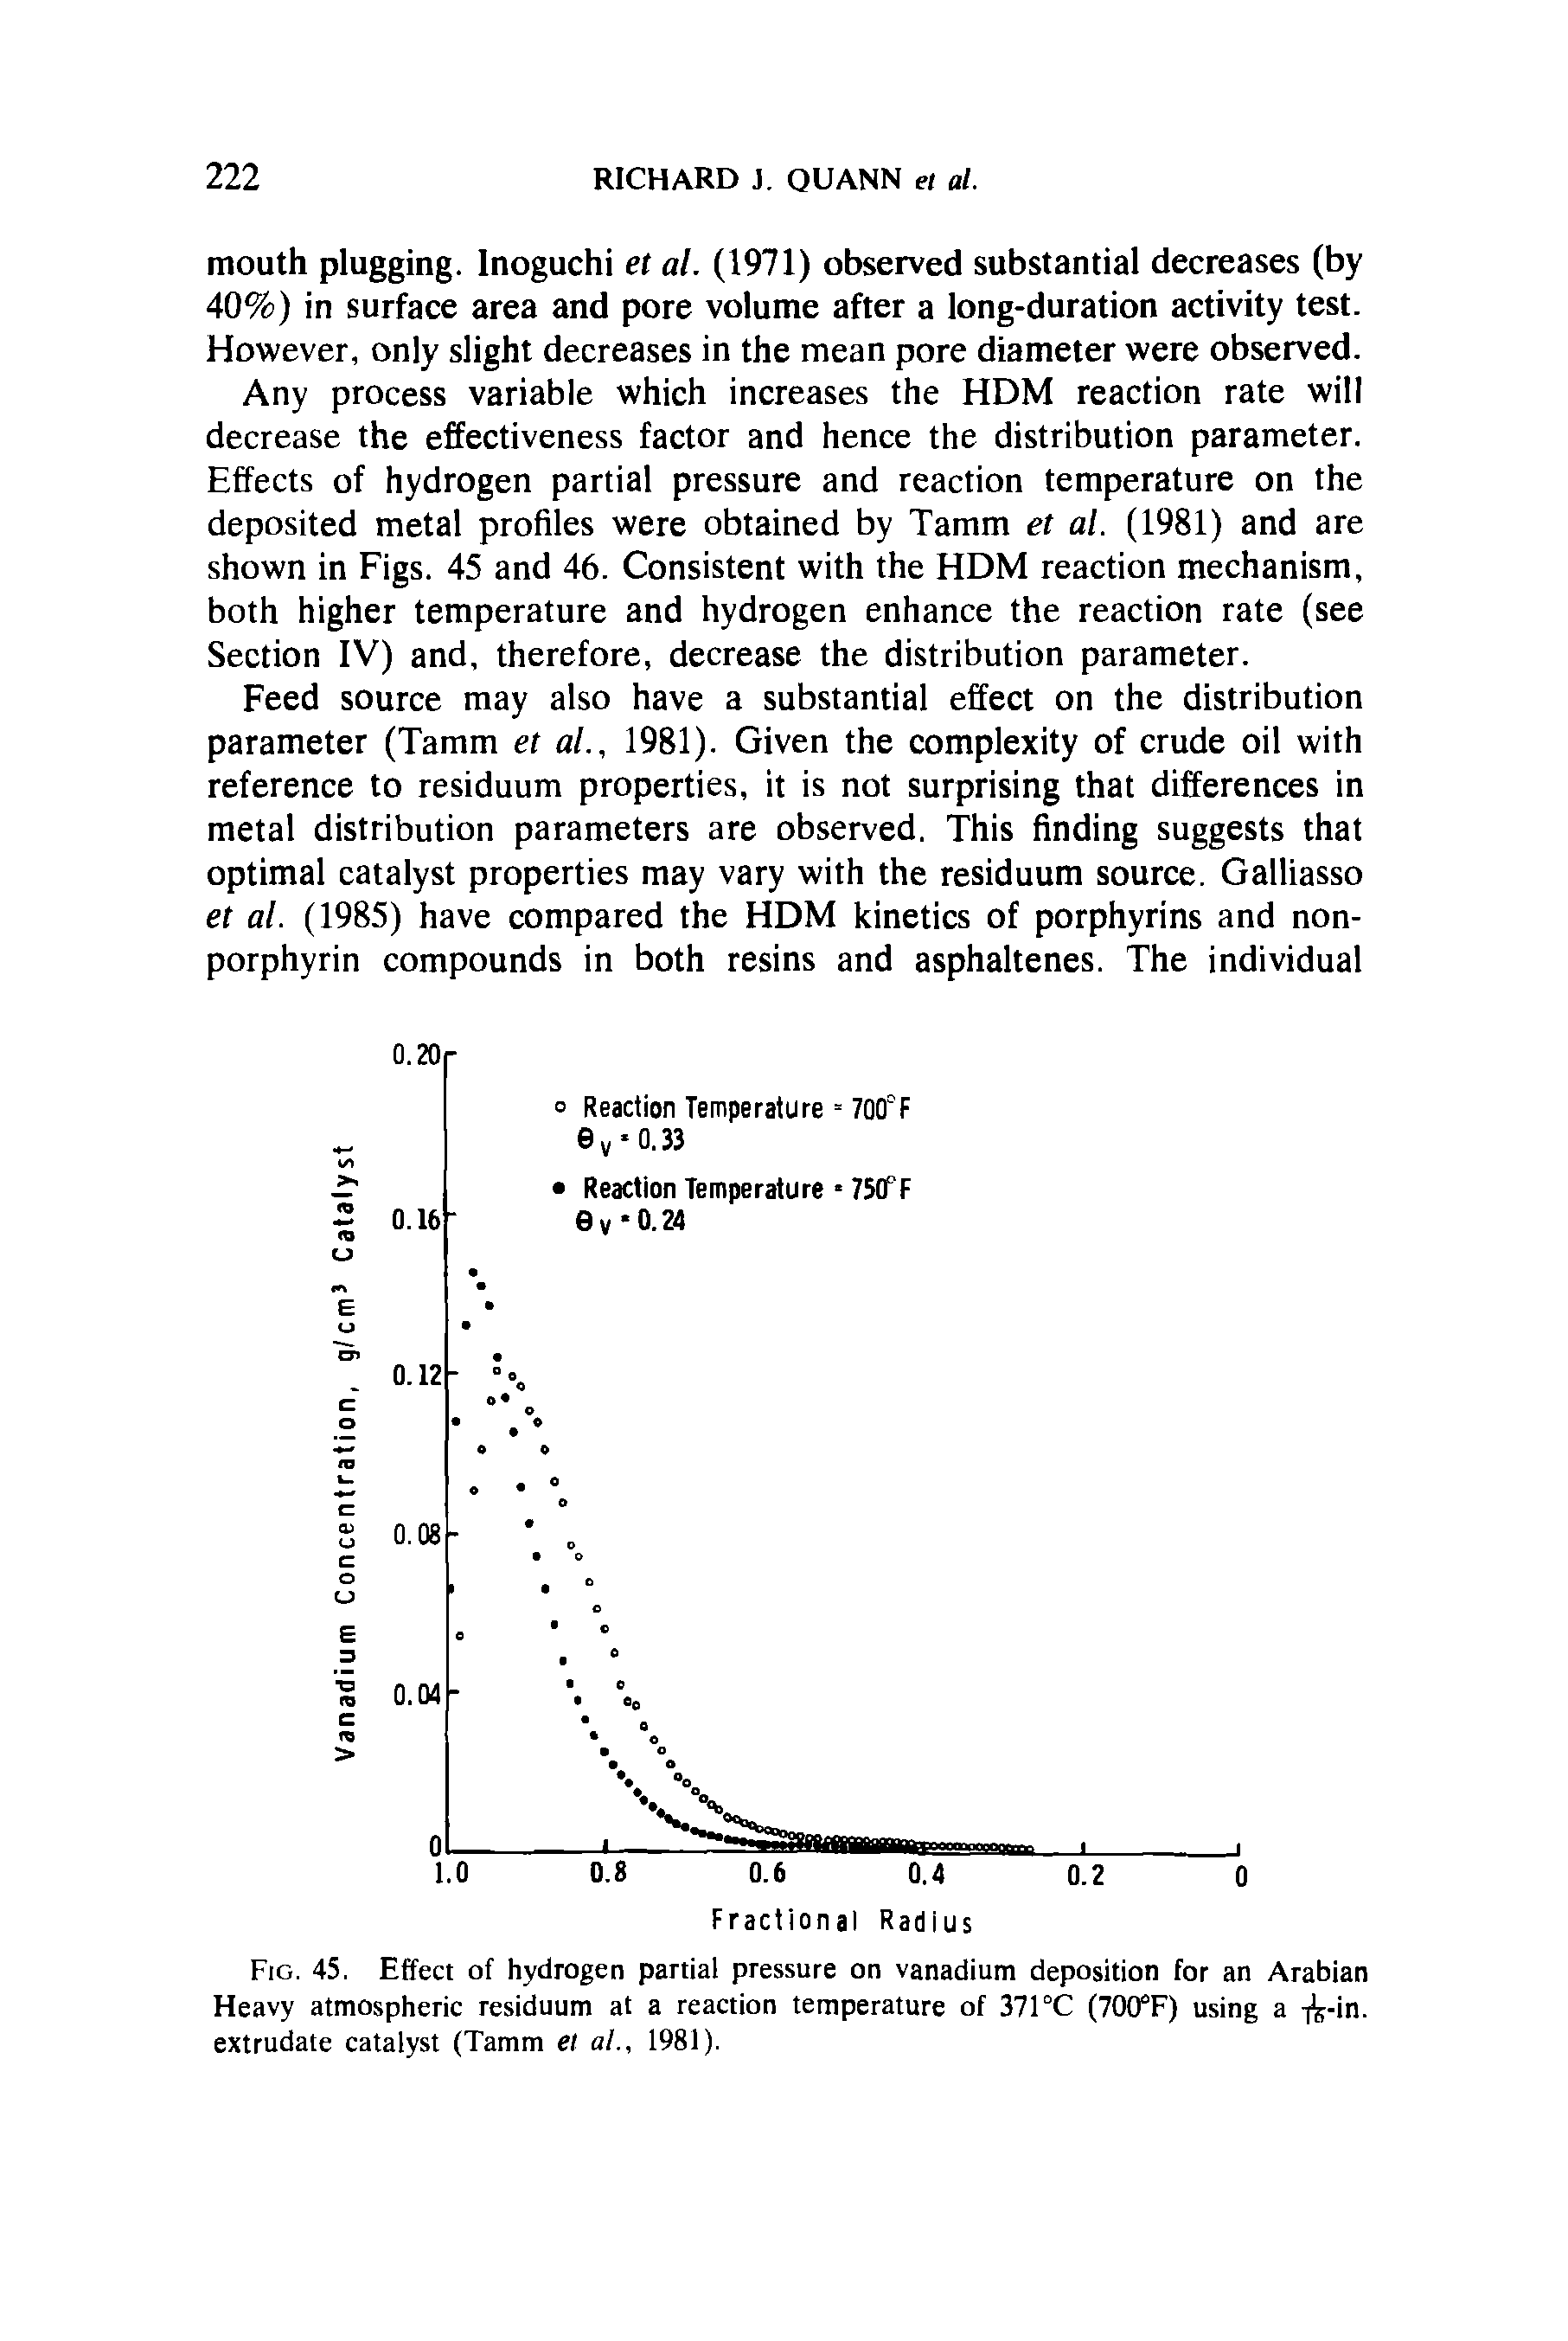 Fig. 45. Effect of hydrogen partial pressure on vanadium deposition for an Arabian Heavy atmospheric residuum at a reaction temperature of 371°C (700°F) using a -in. extrudate catalyst (Tamm et at., 1981).